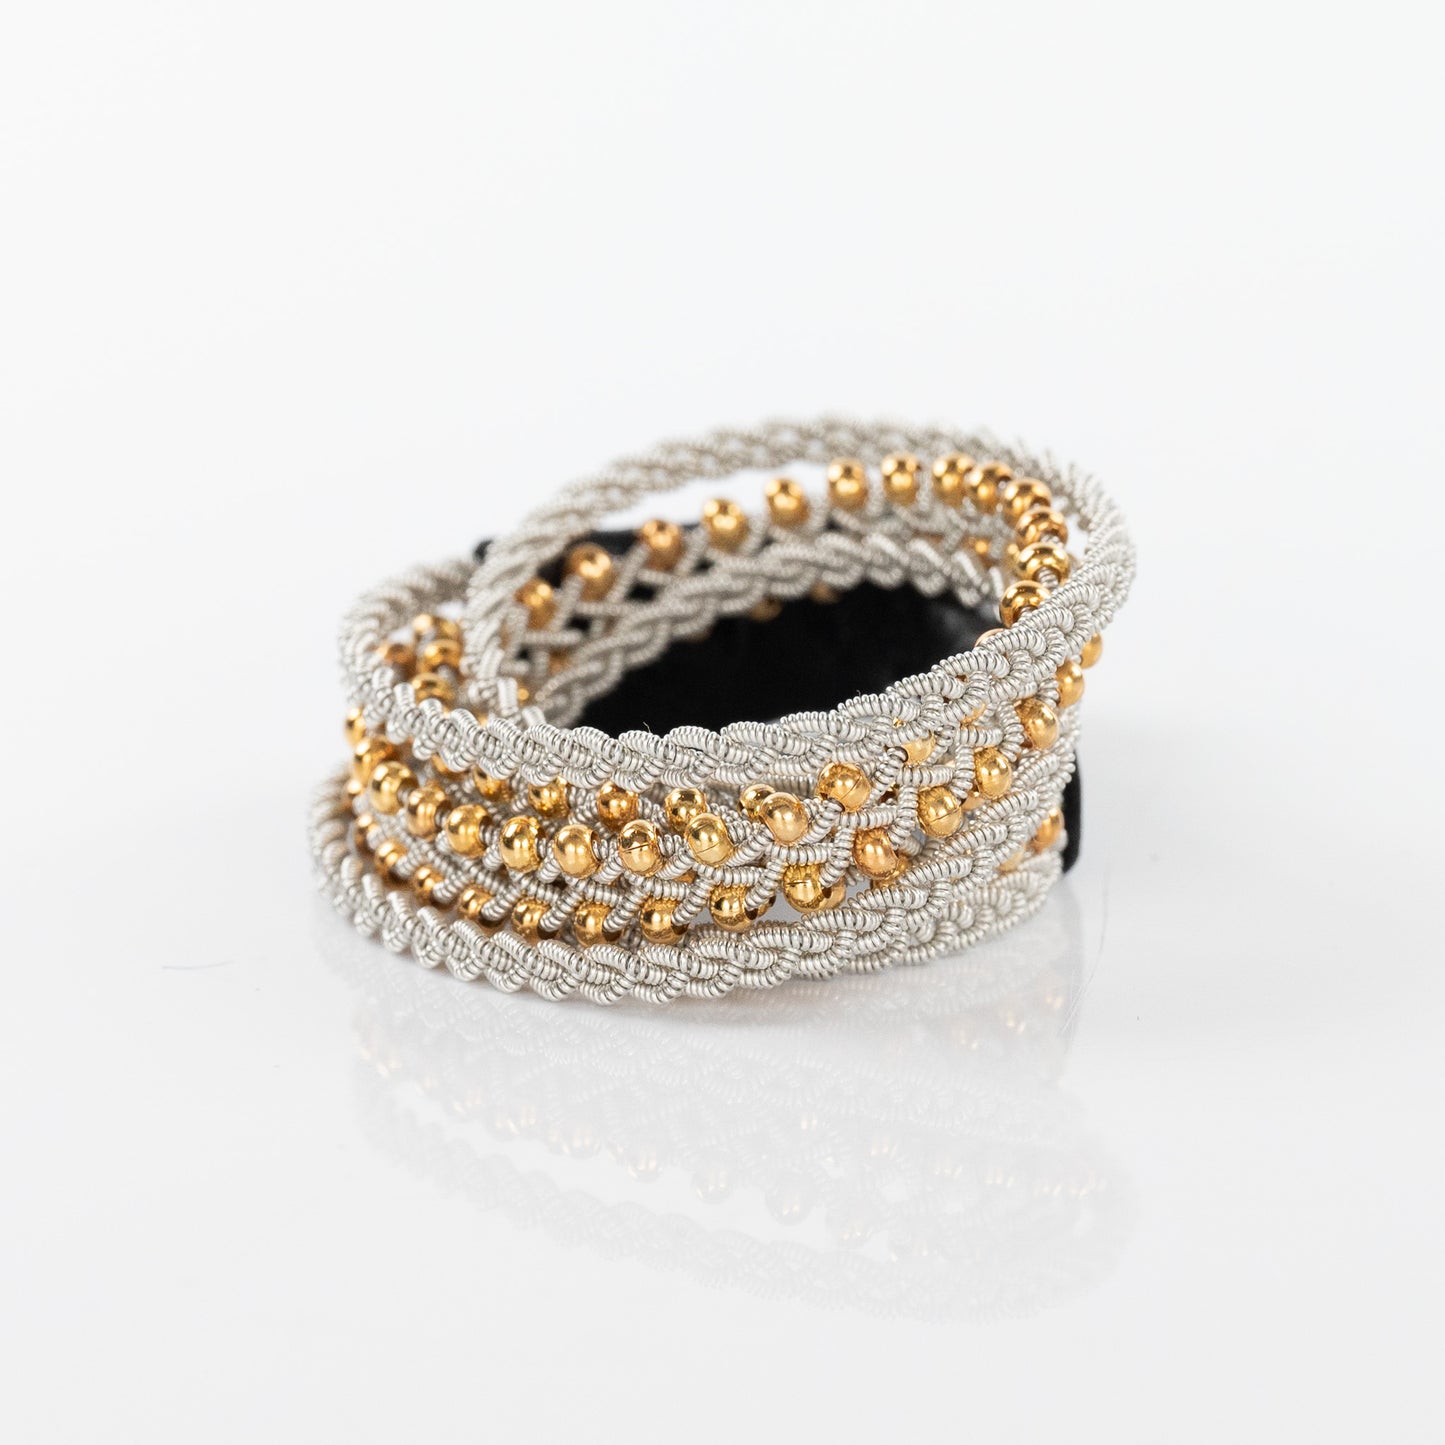 Lucia Silver and Gold Loose Strand Braid Bracelet with Black Closure